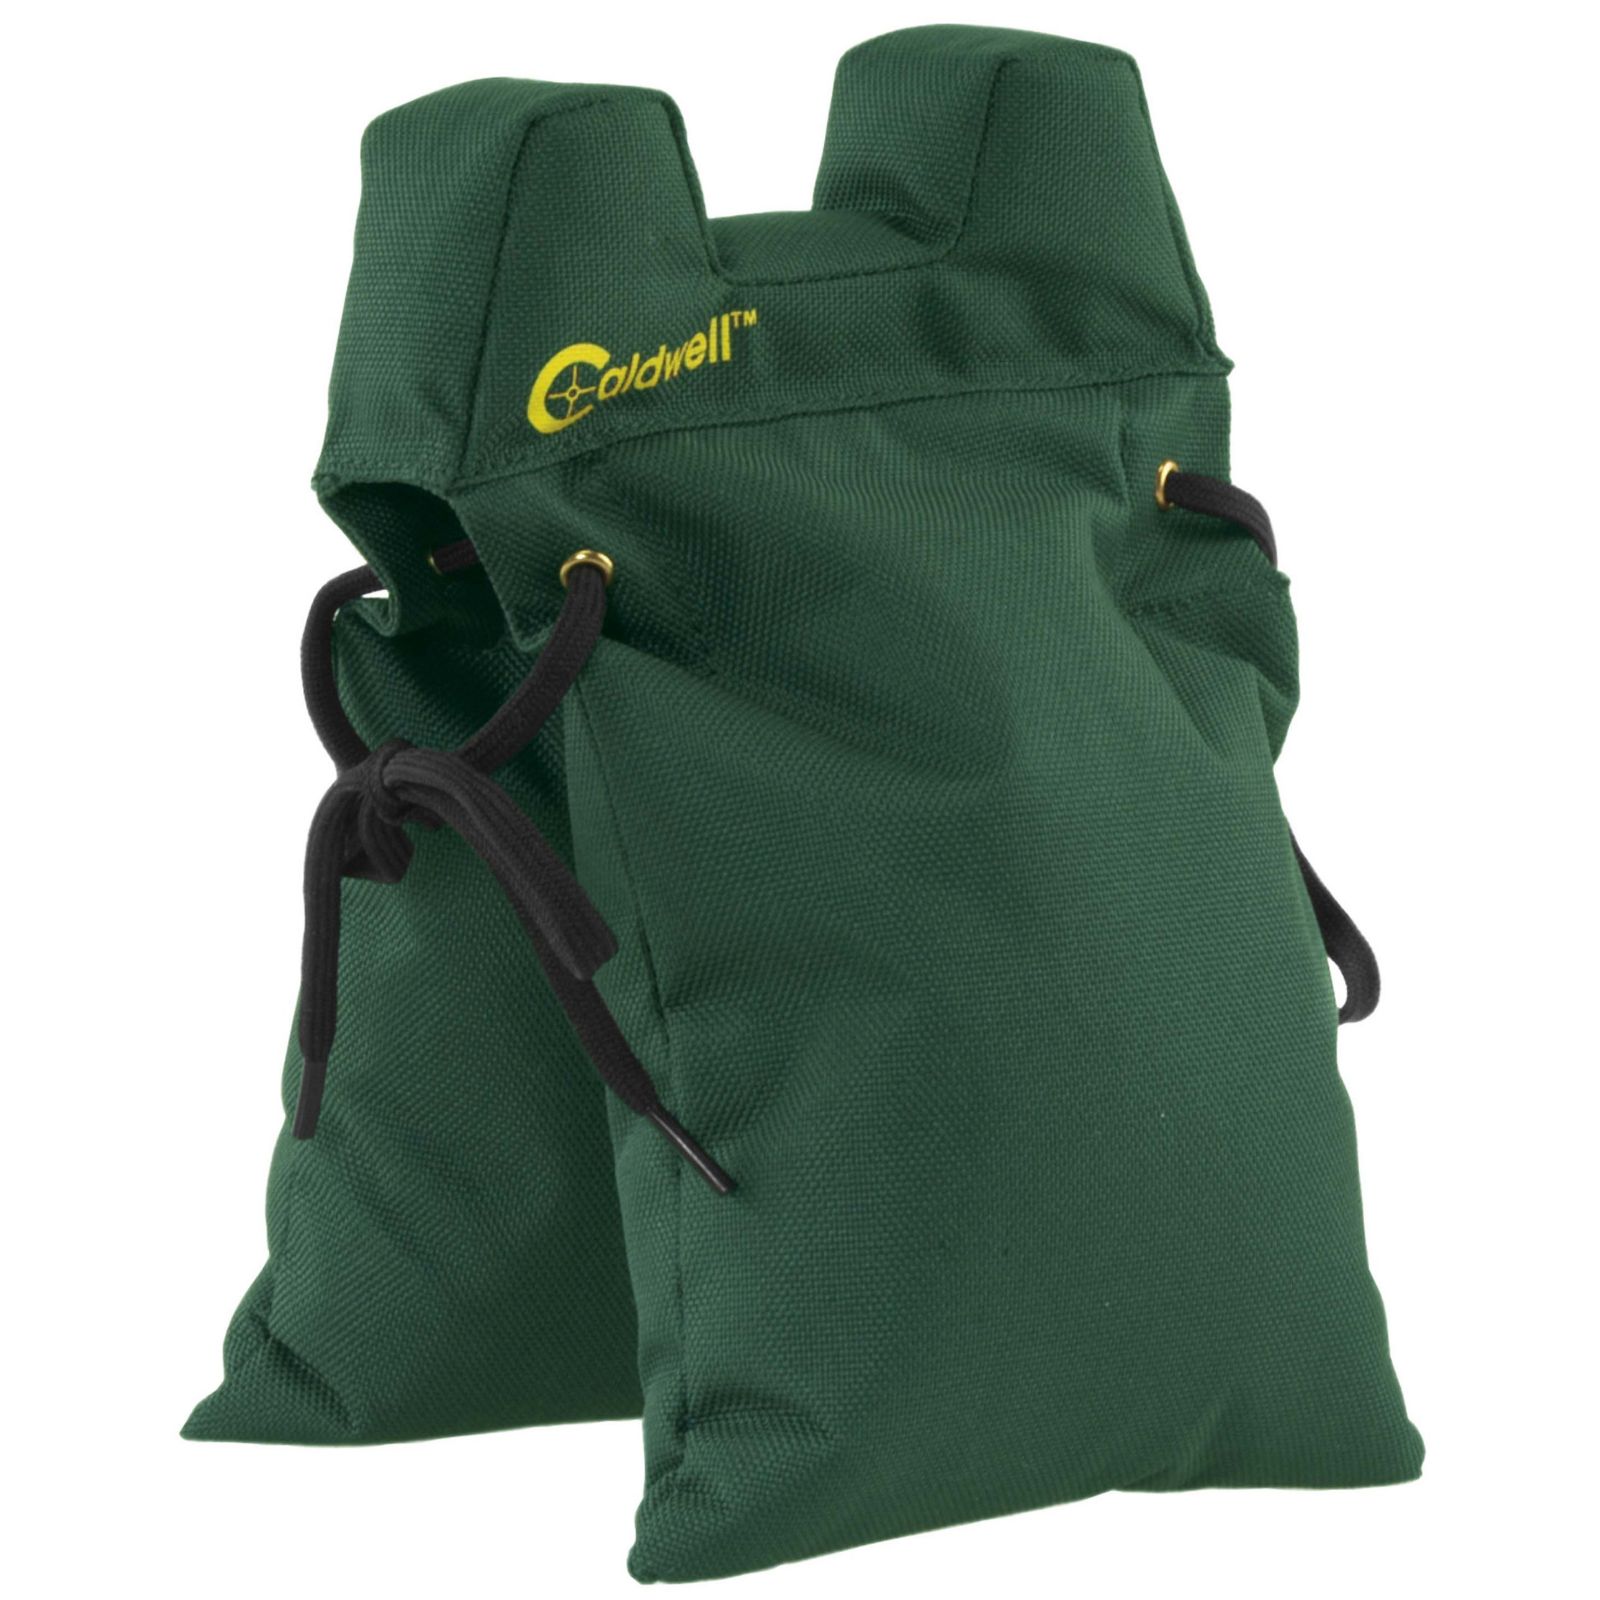 Support and protect your rifle in almost any hunting situation.  The Caldwell Blind Bag is the answer when other types of support are unavailable or inappropriate.  Quick set-up for accurate shooting ...